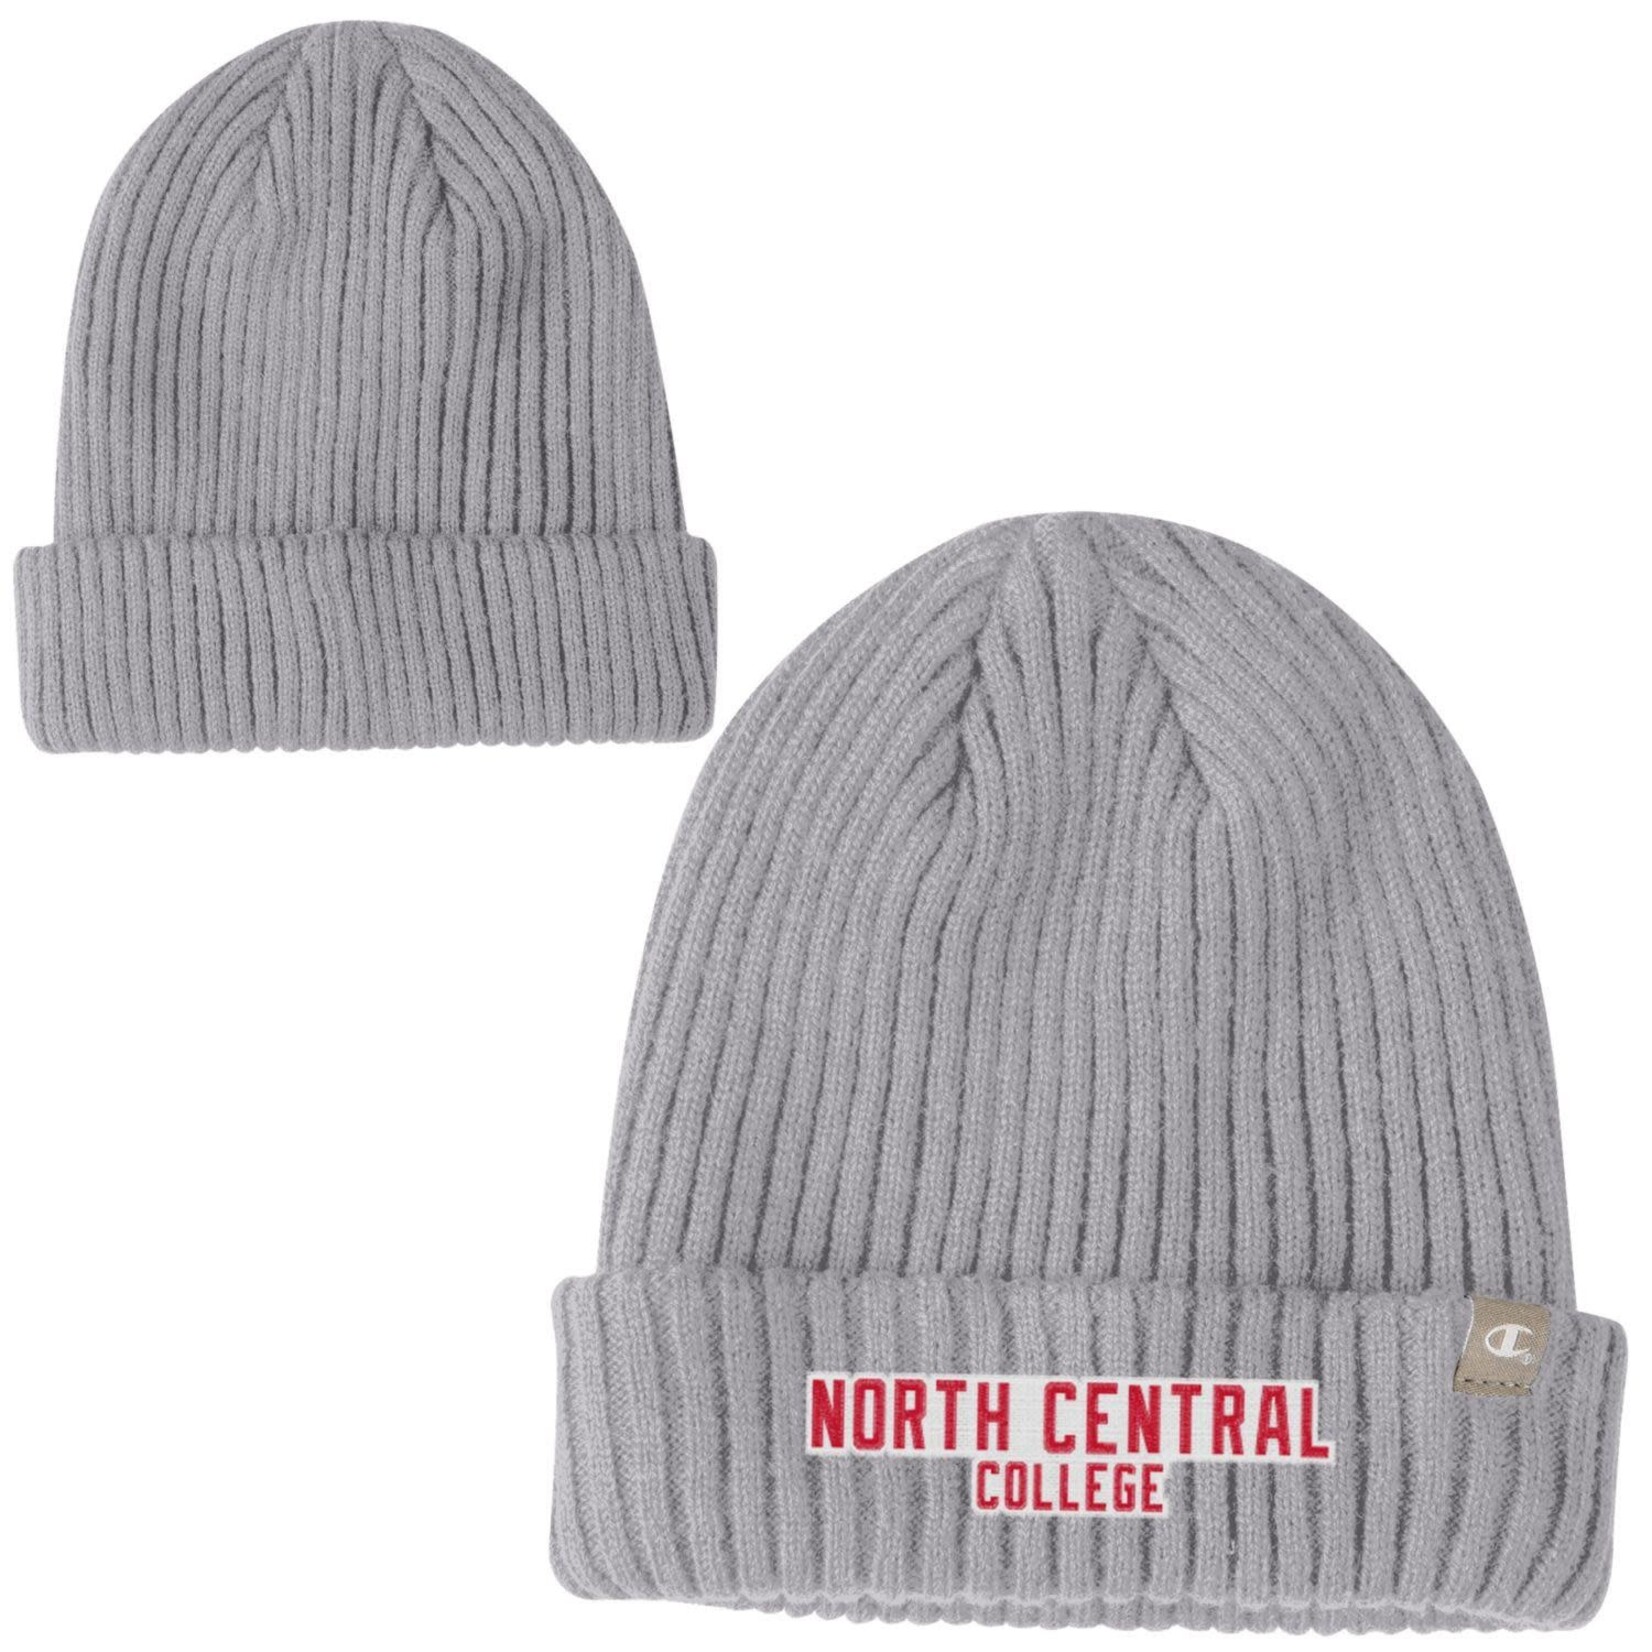 Champion North Central College Thick Knit Rib Beanie with Cuff  Oxford Heather